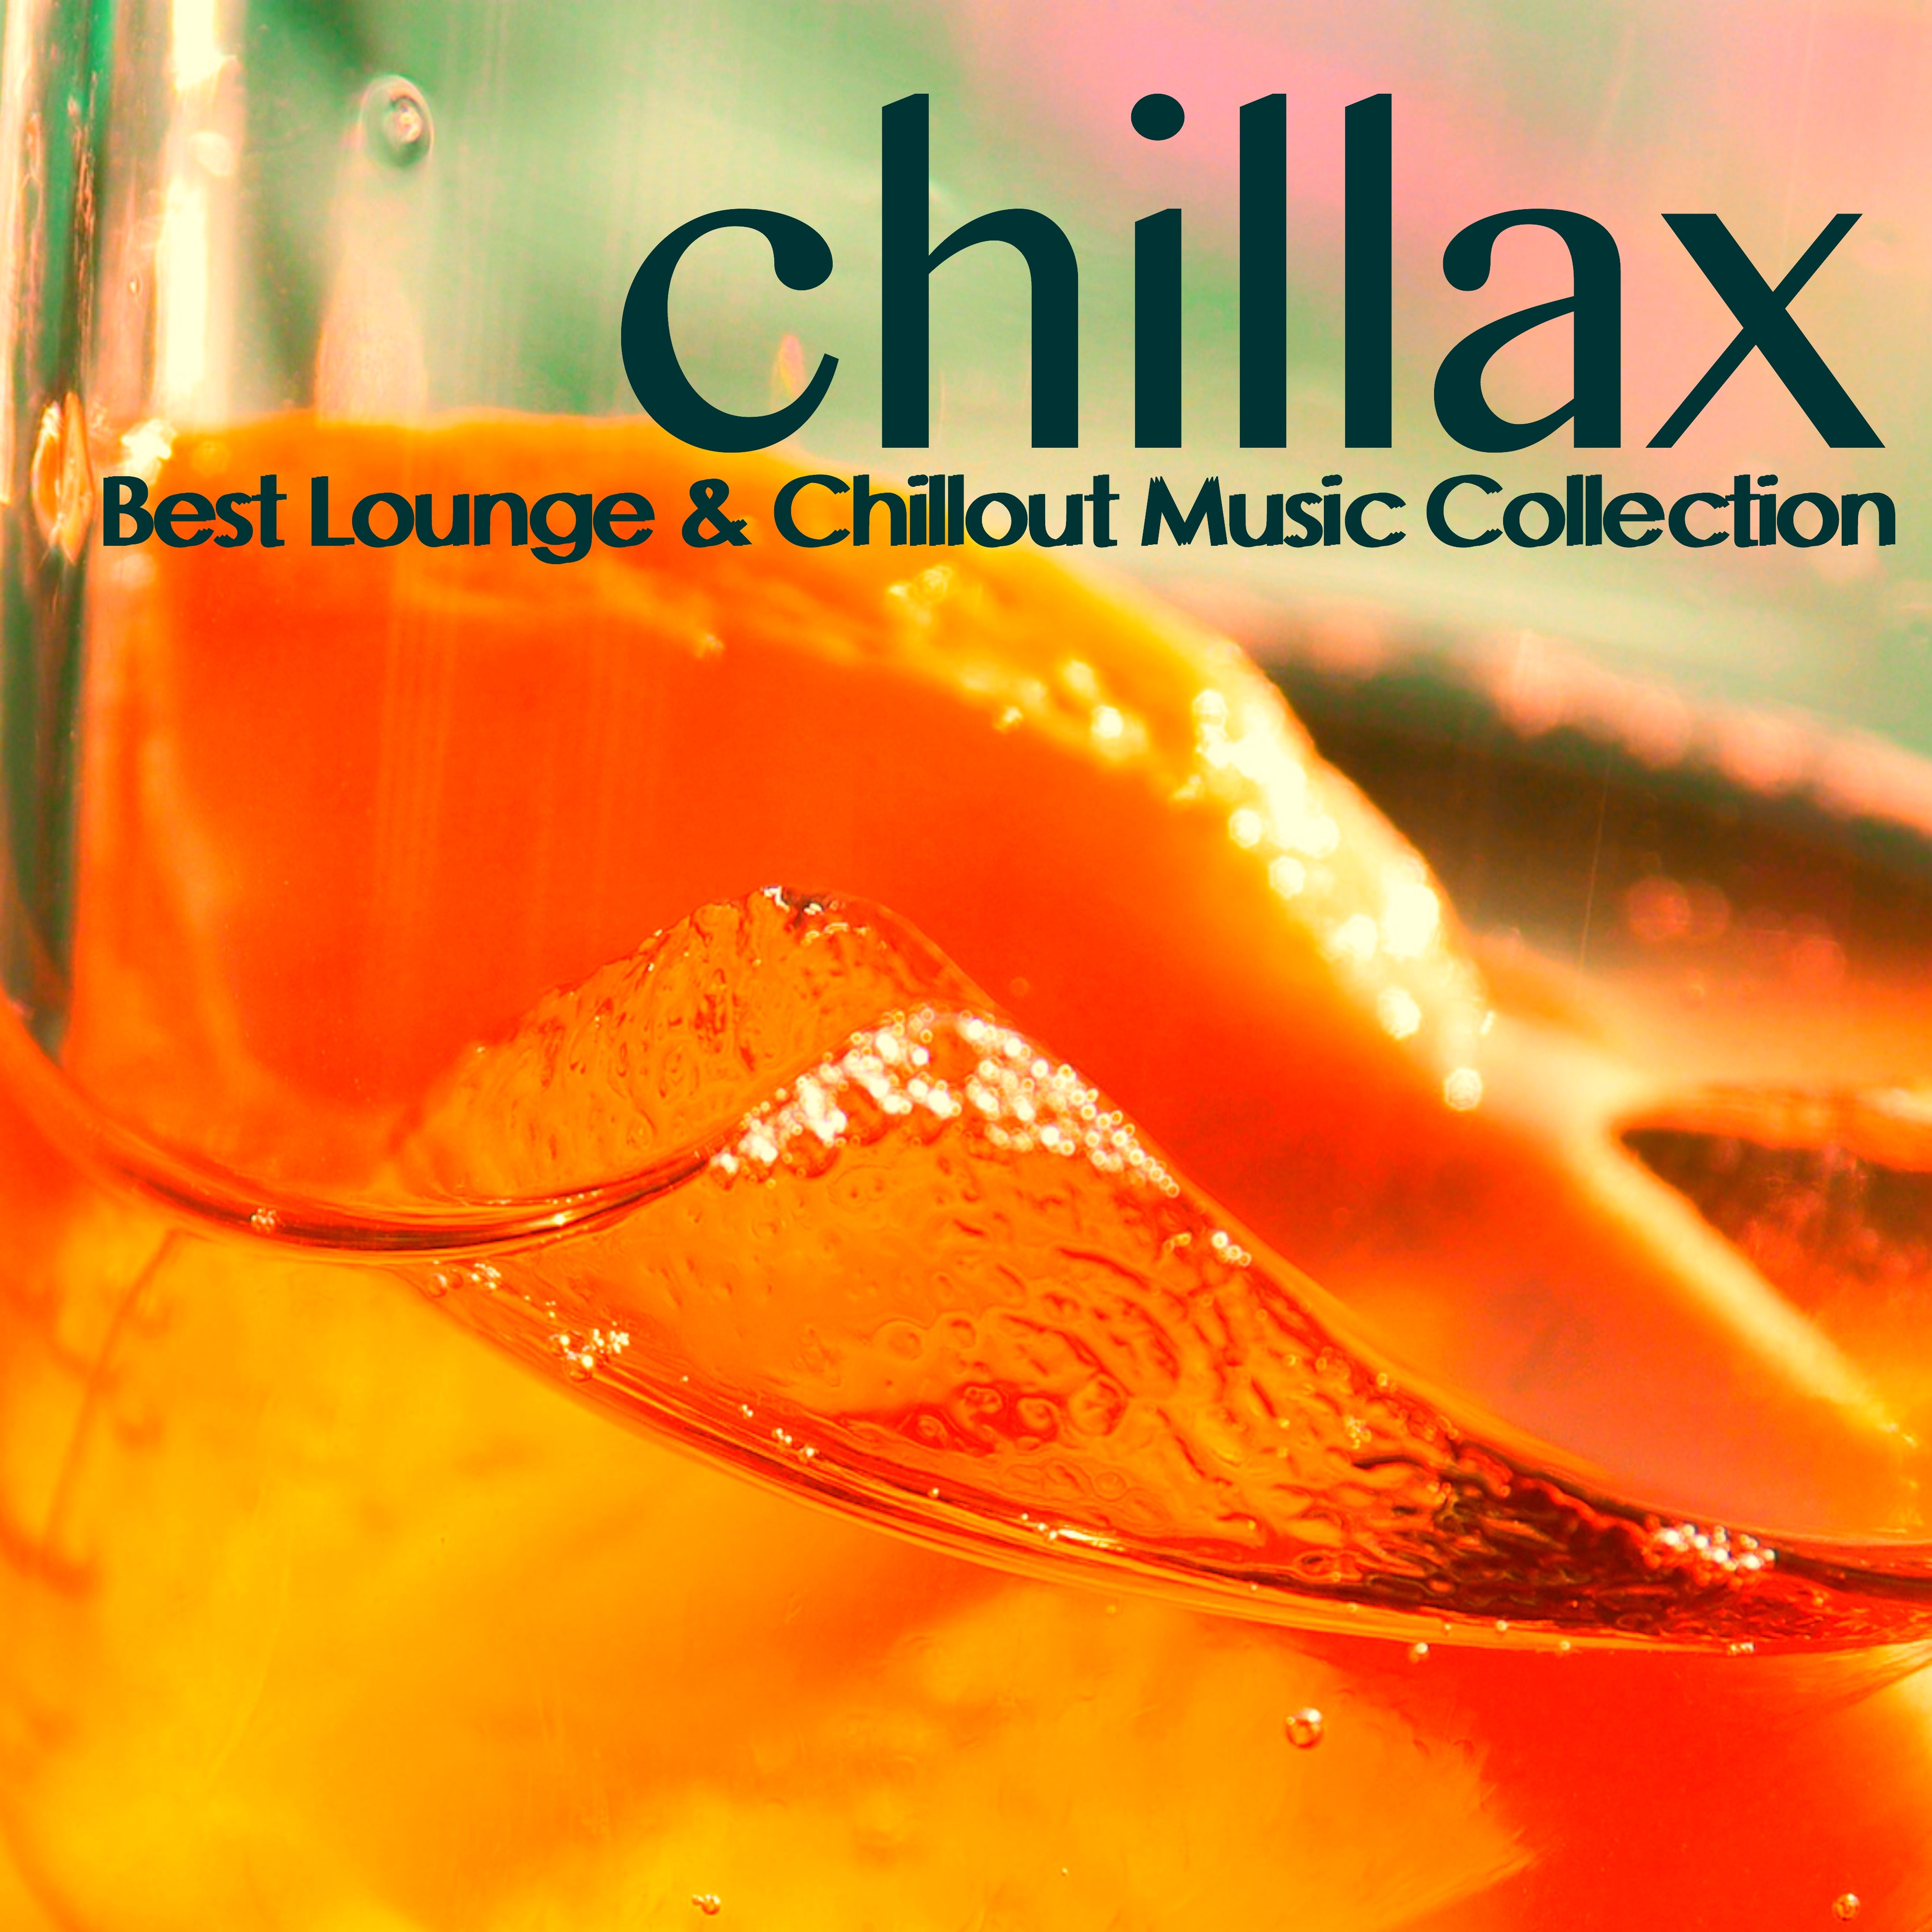 Chillax – Best Lounge & Chillout Music Collection